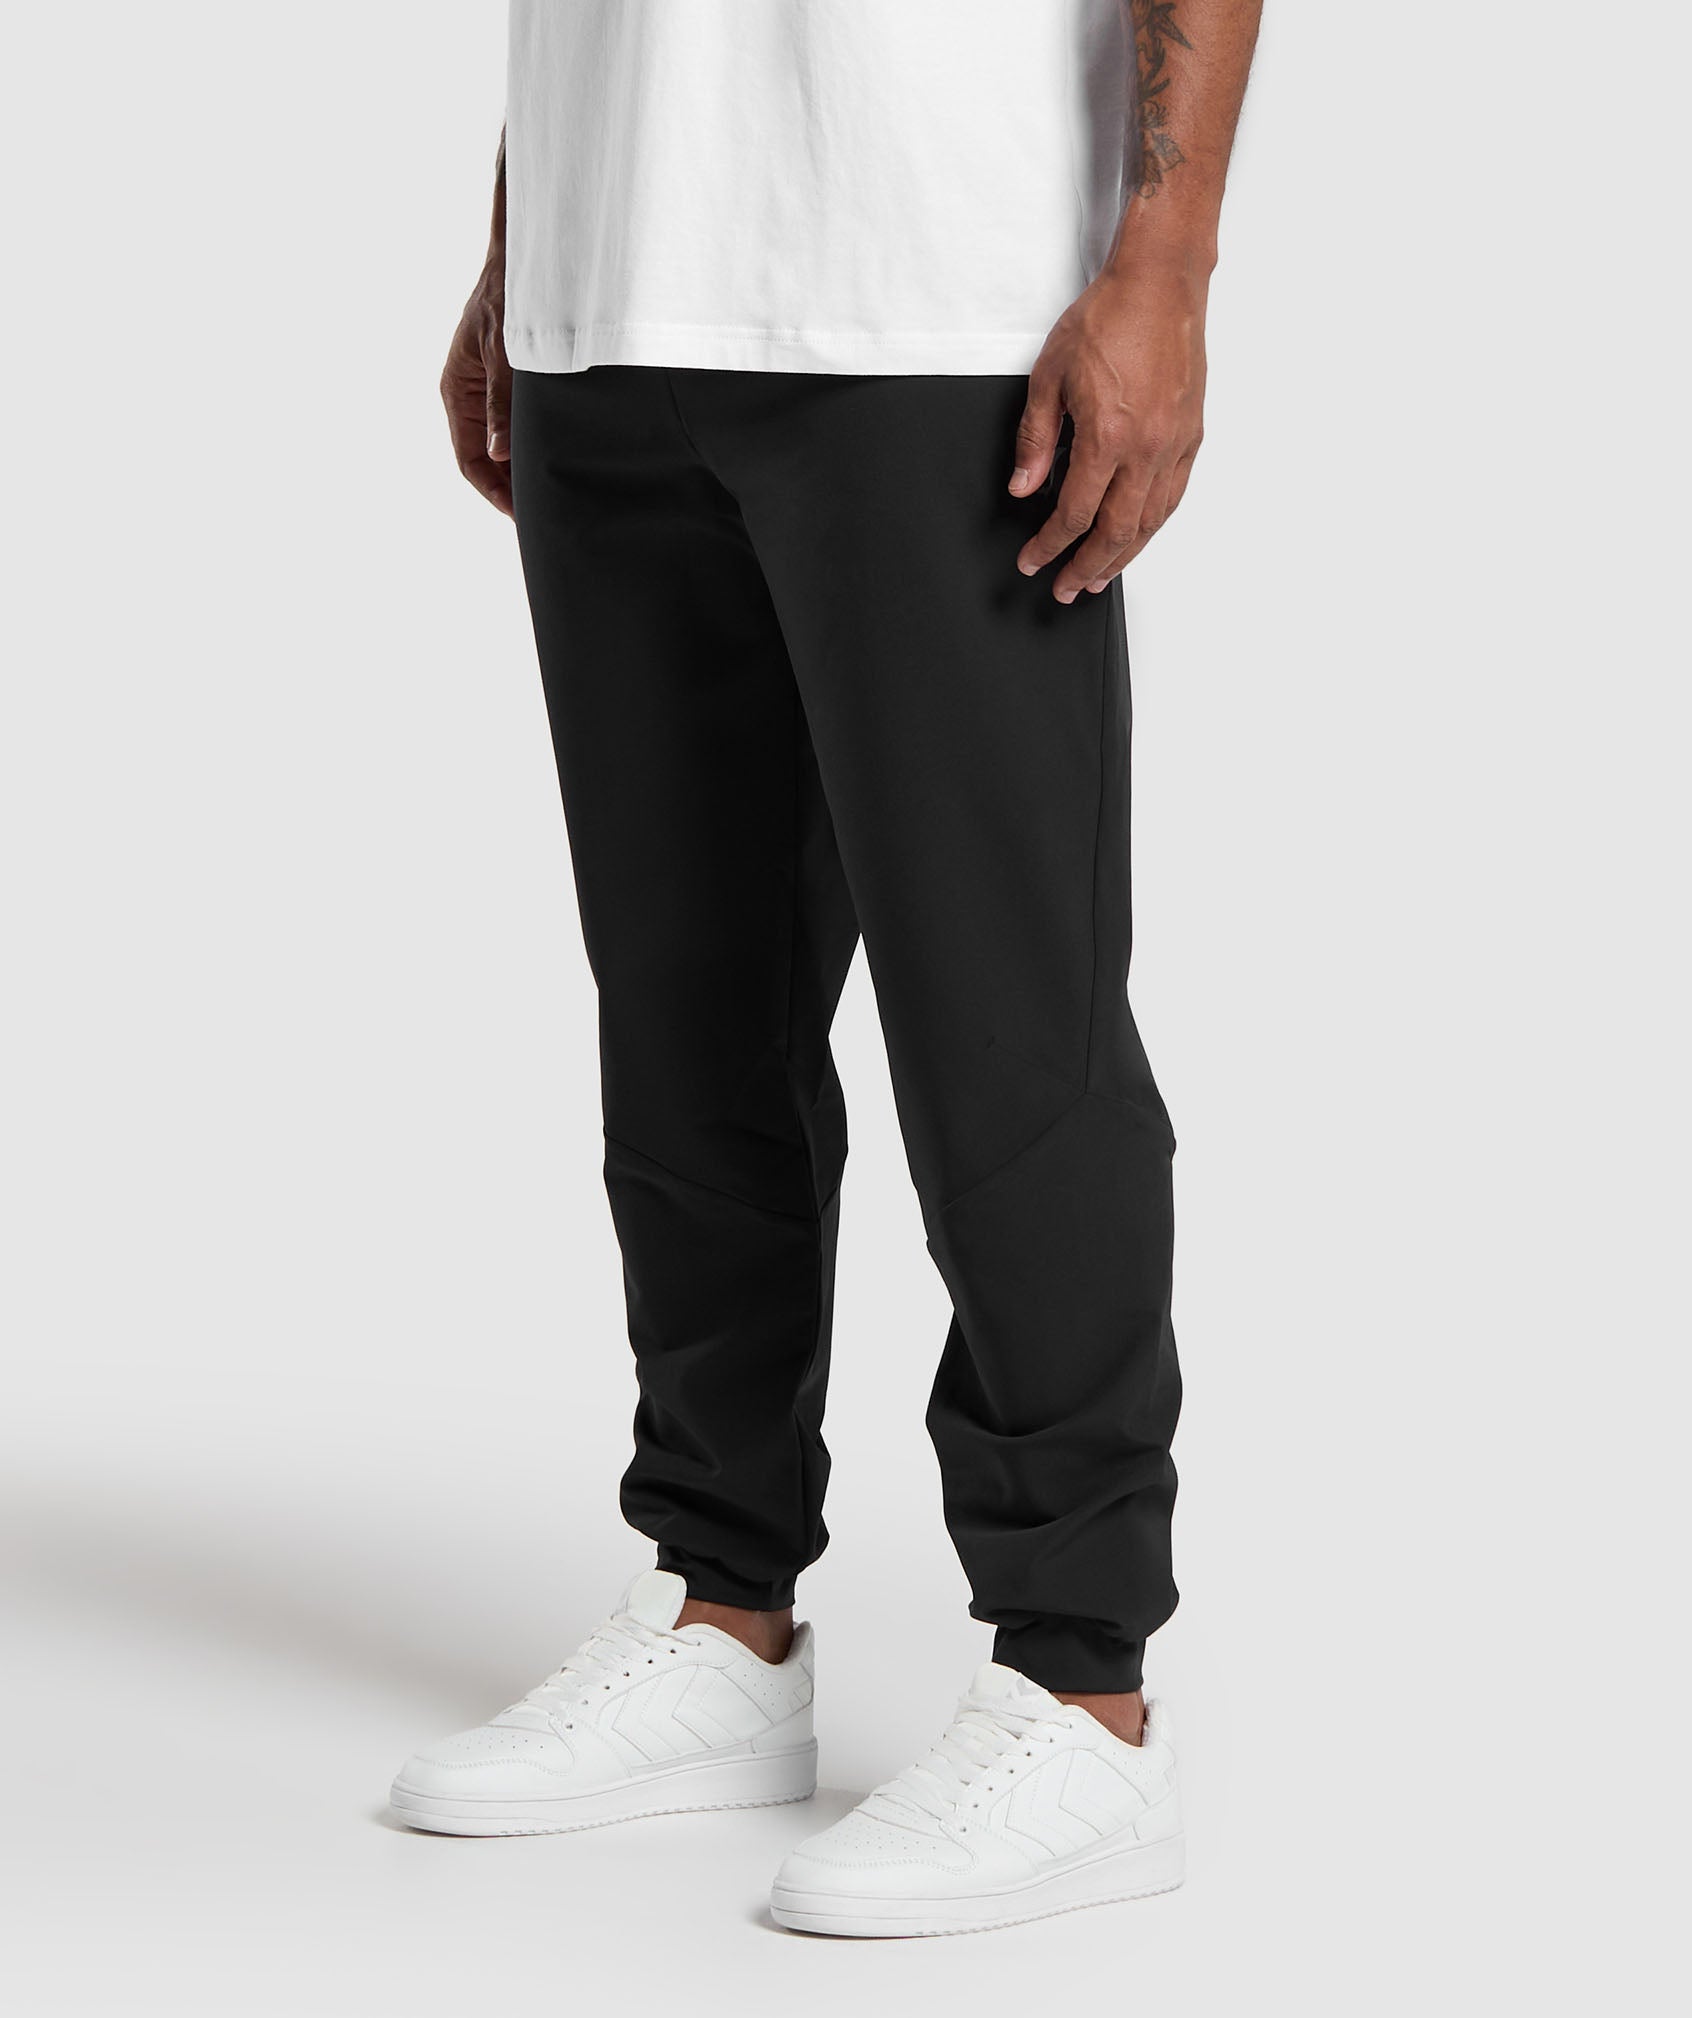 Ease Woven Joggers in Black - view 3